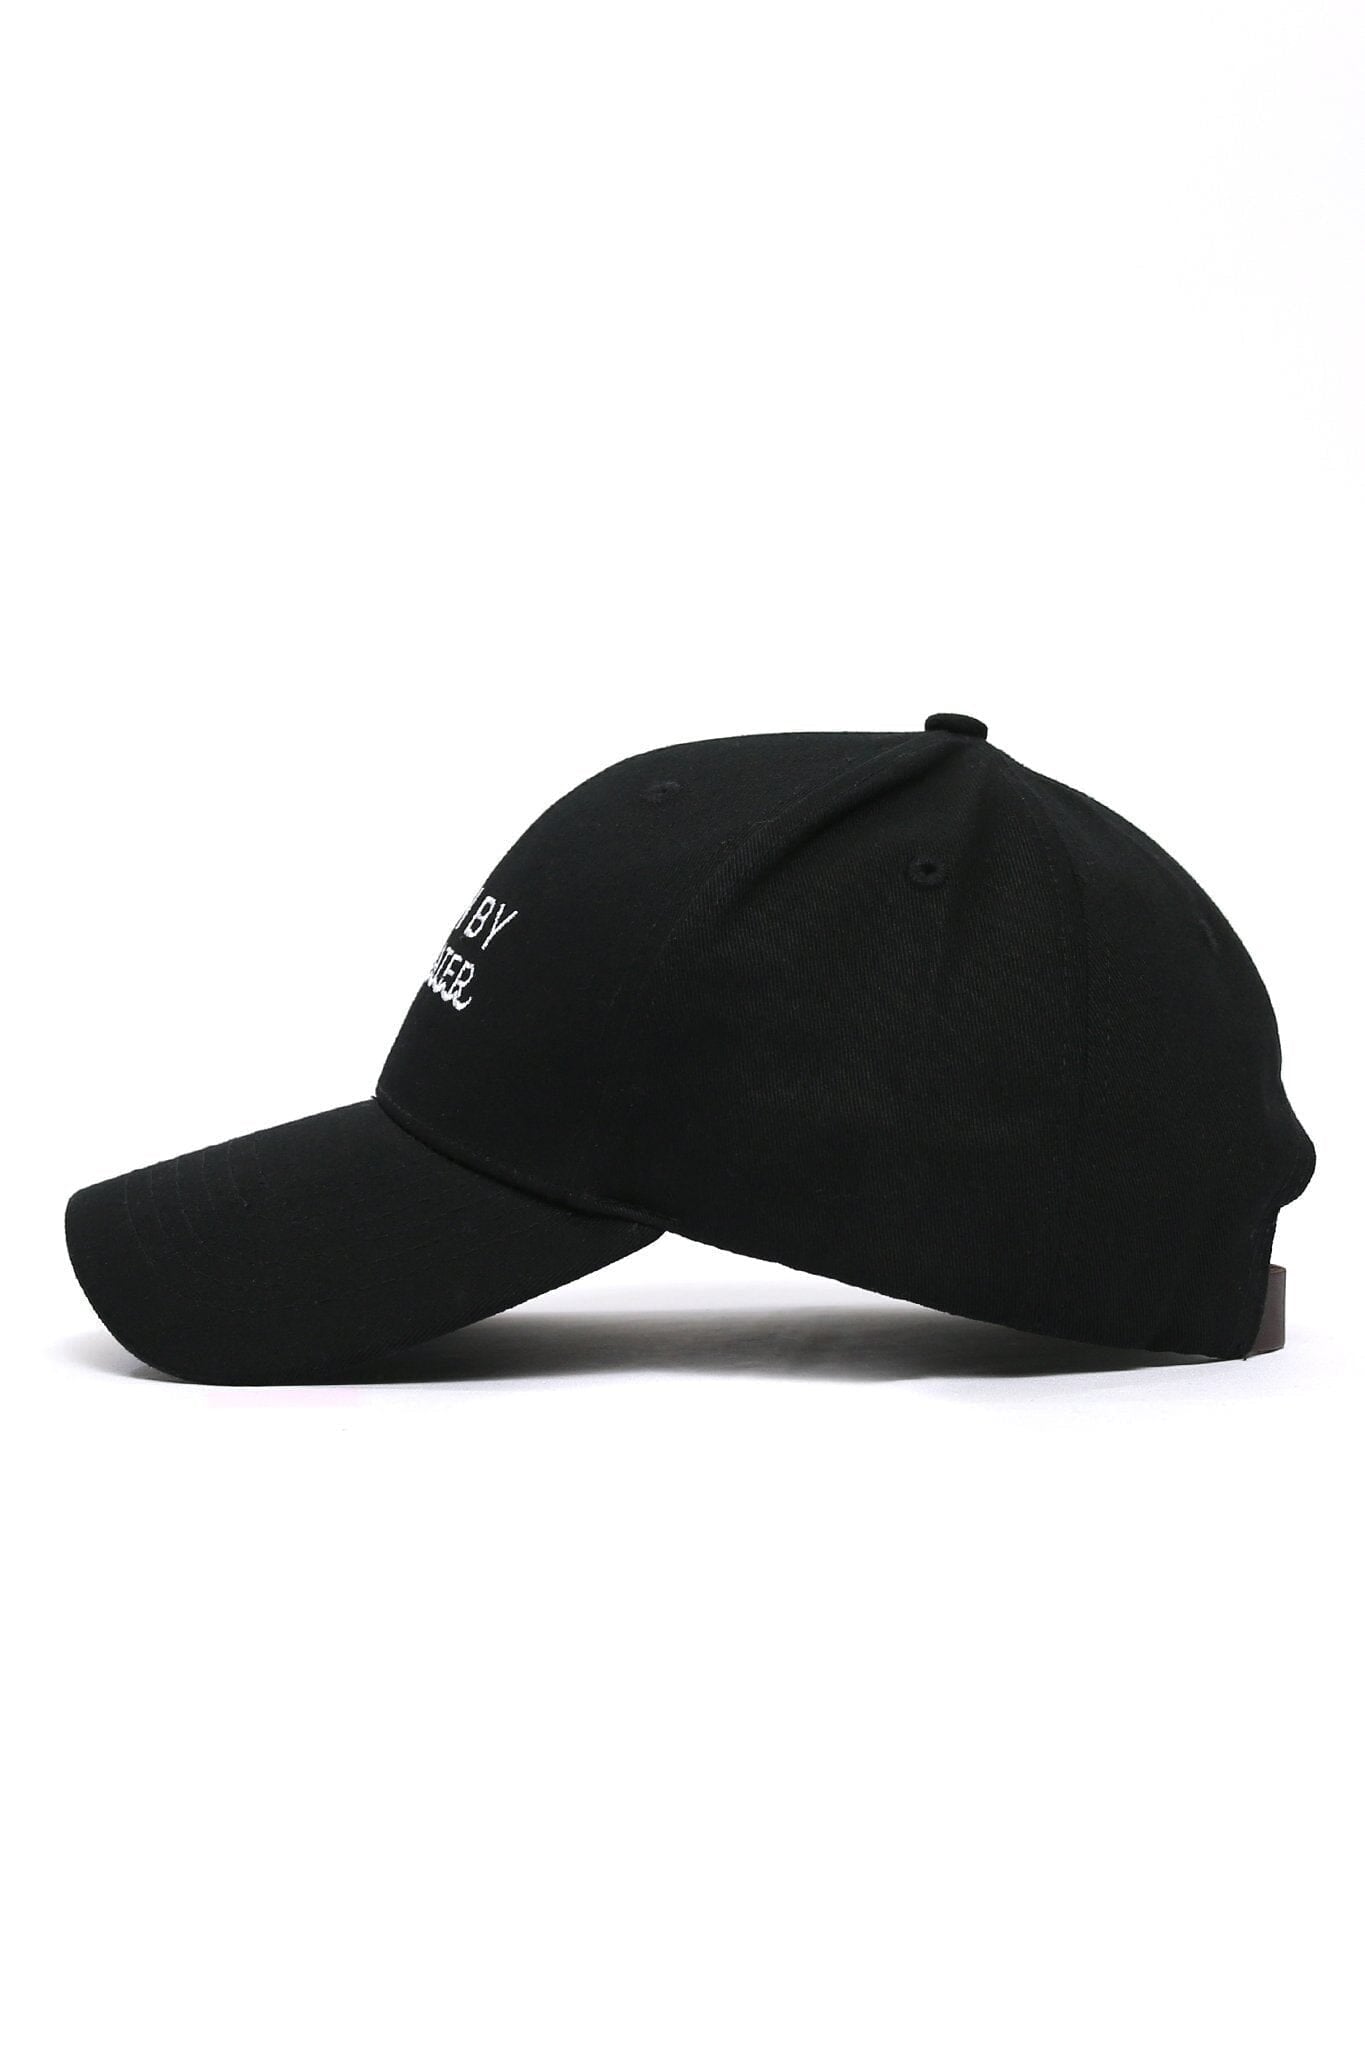 BORN BY WATER WAVES CAP - B-BLACK - OS